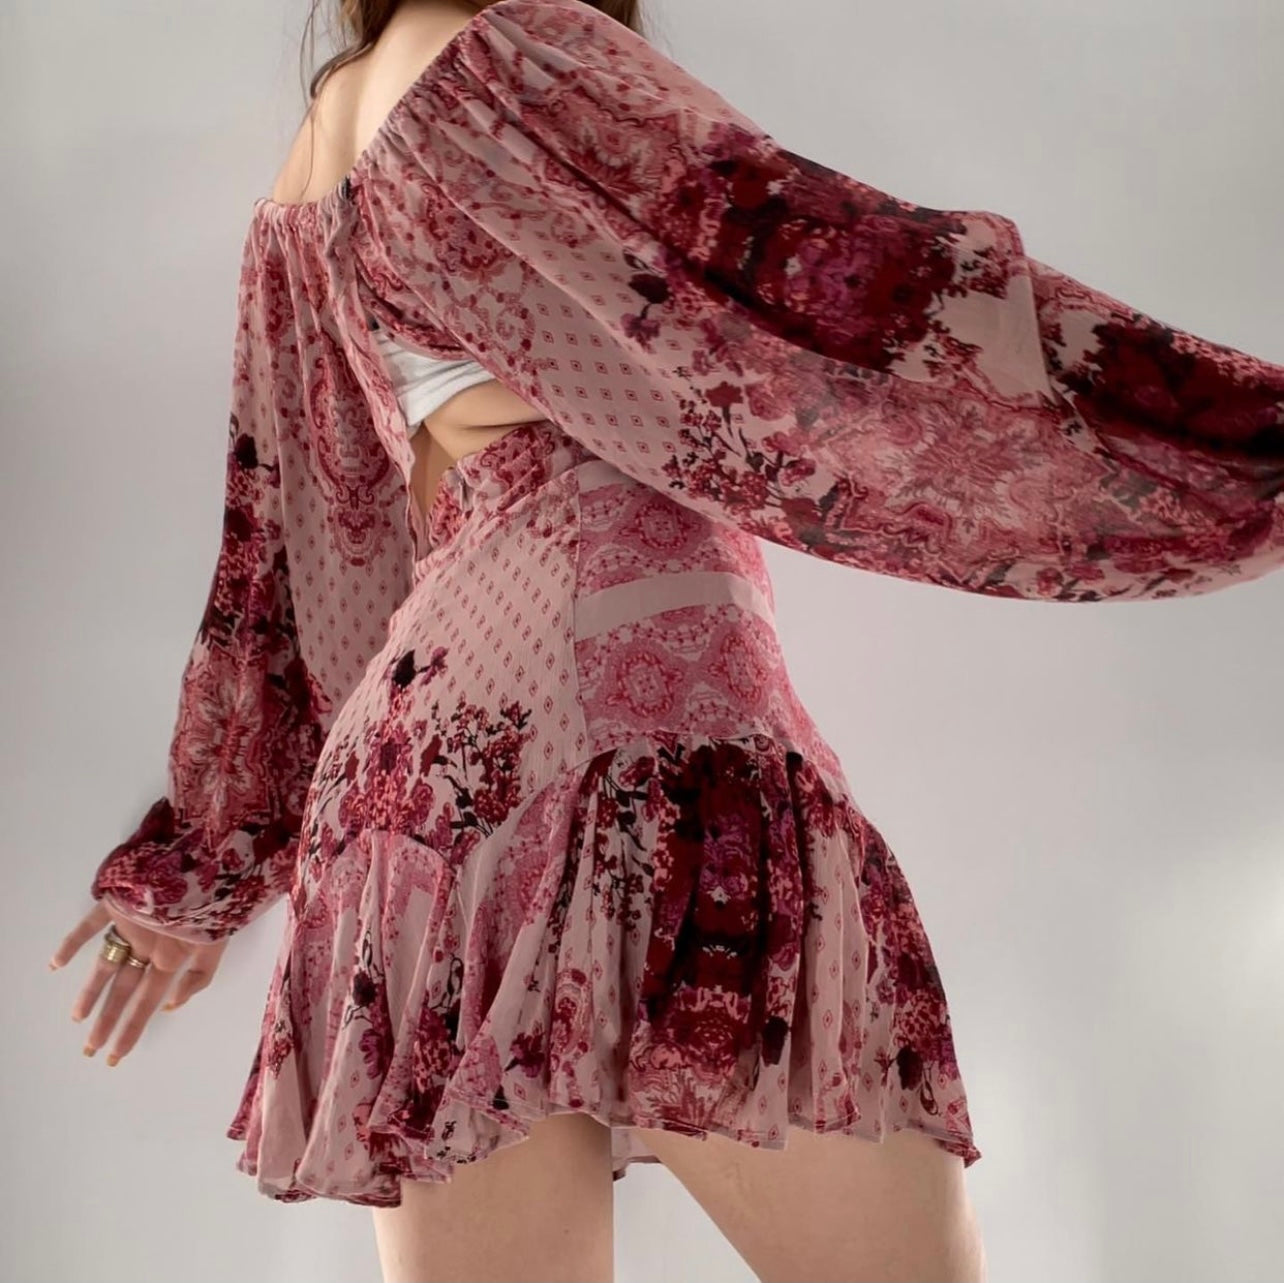 Free People Tapestry Patterned Dress (S)